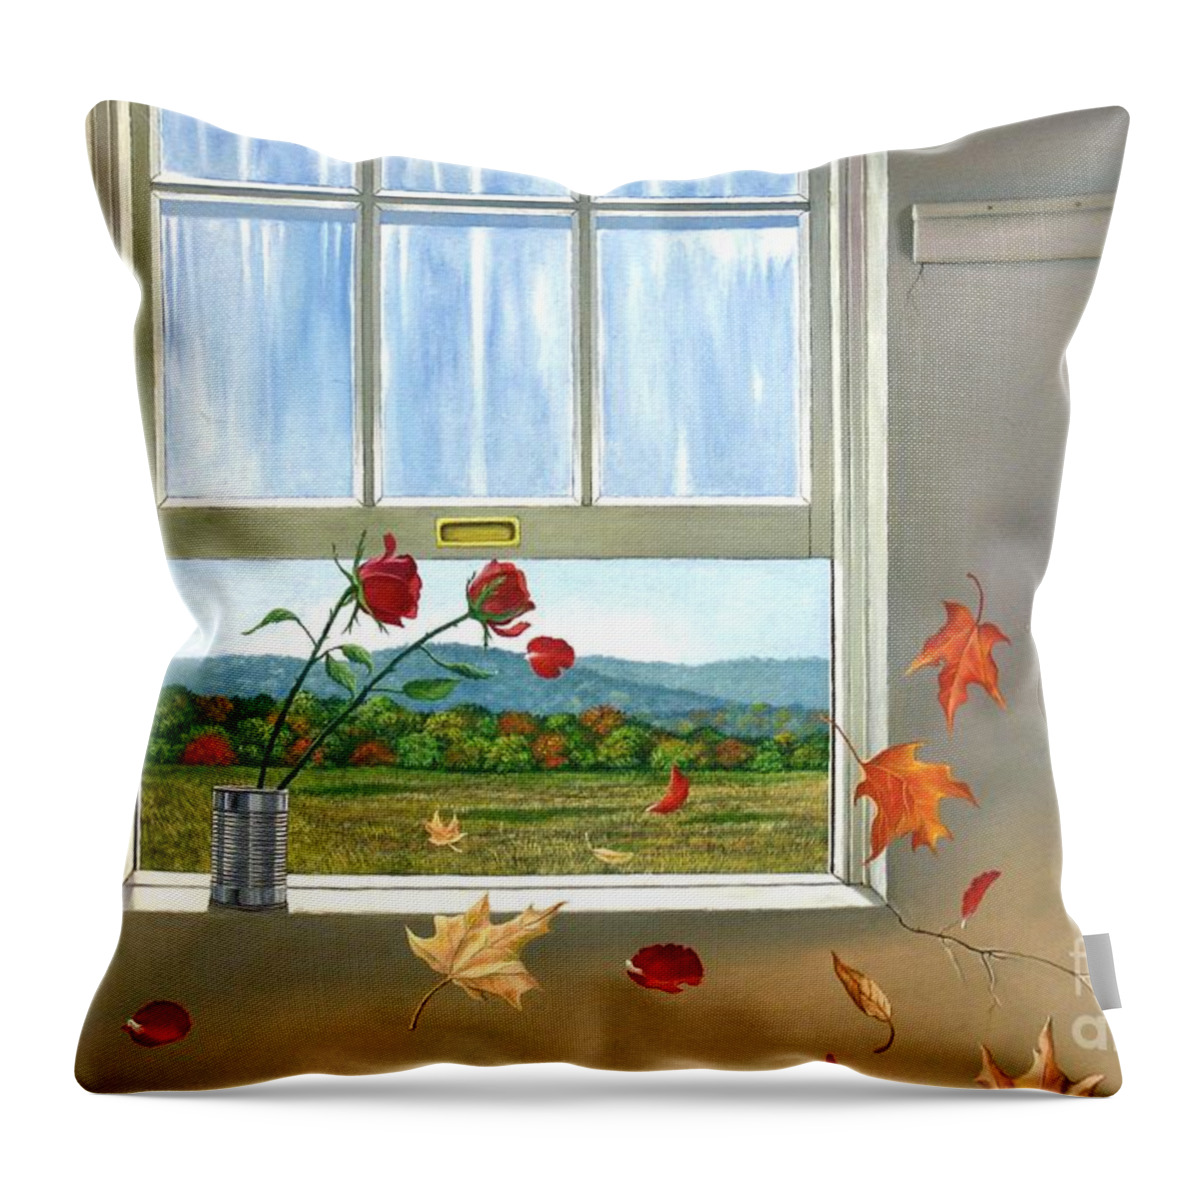 Rose Throw Pillow featuring the painting Early Autumn Breeze by Christopher Shellhammer